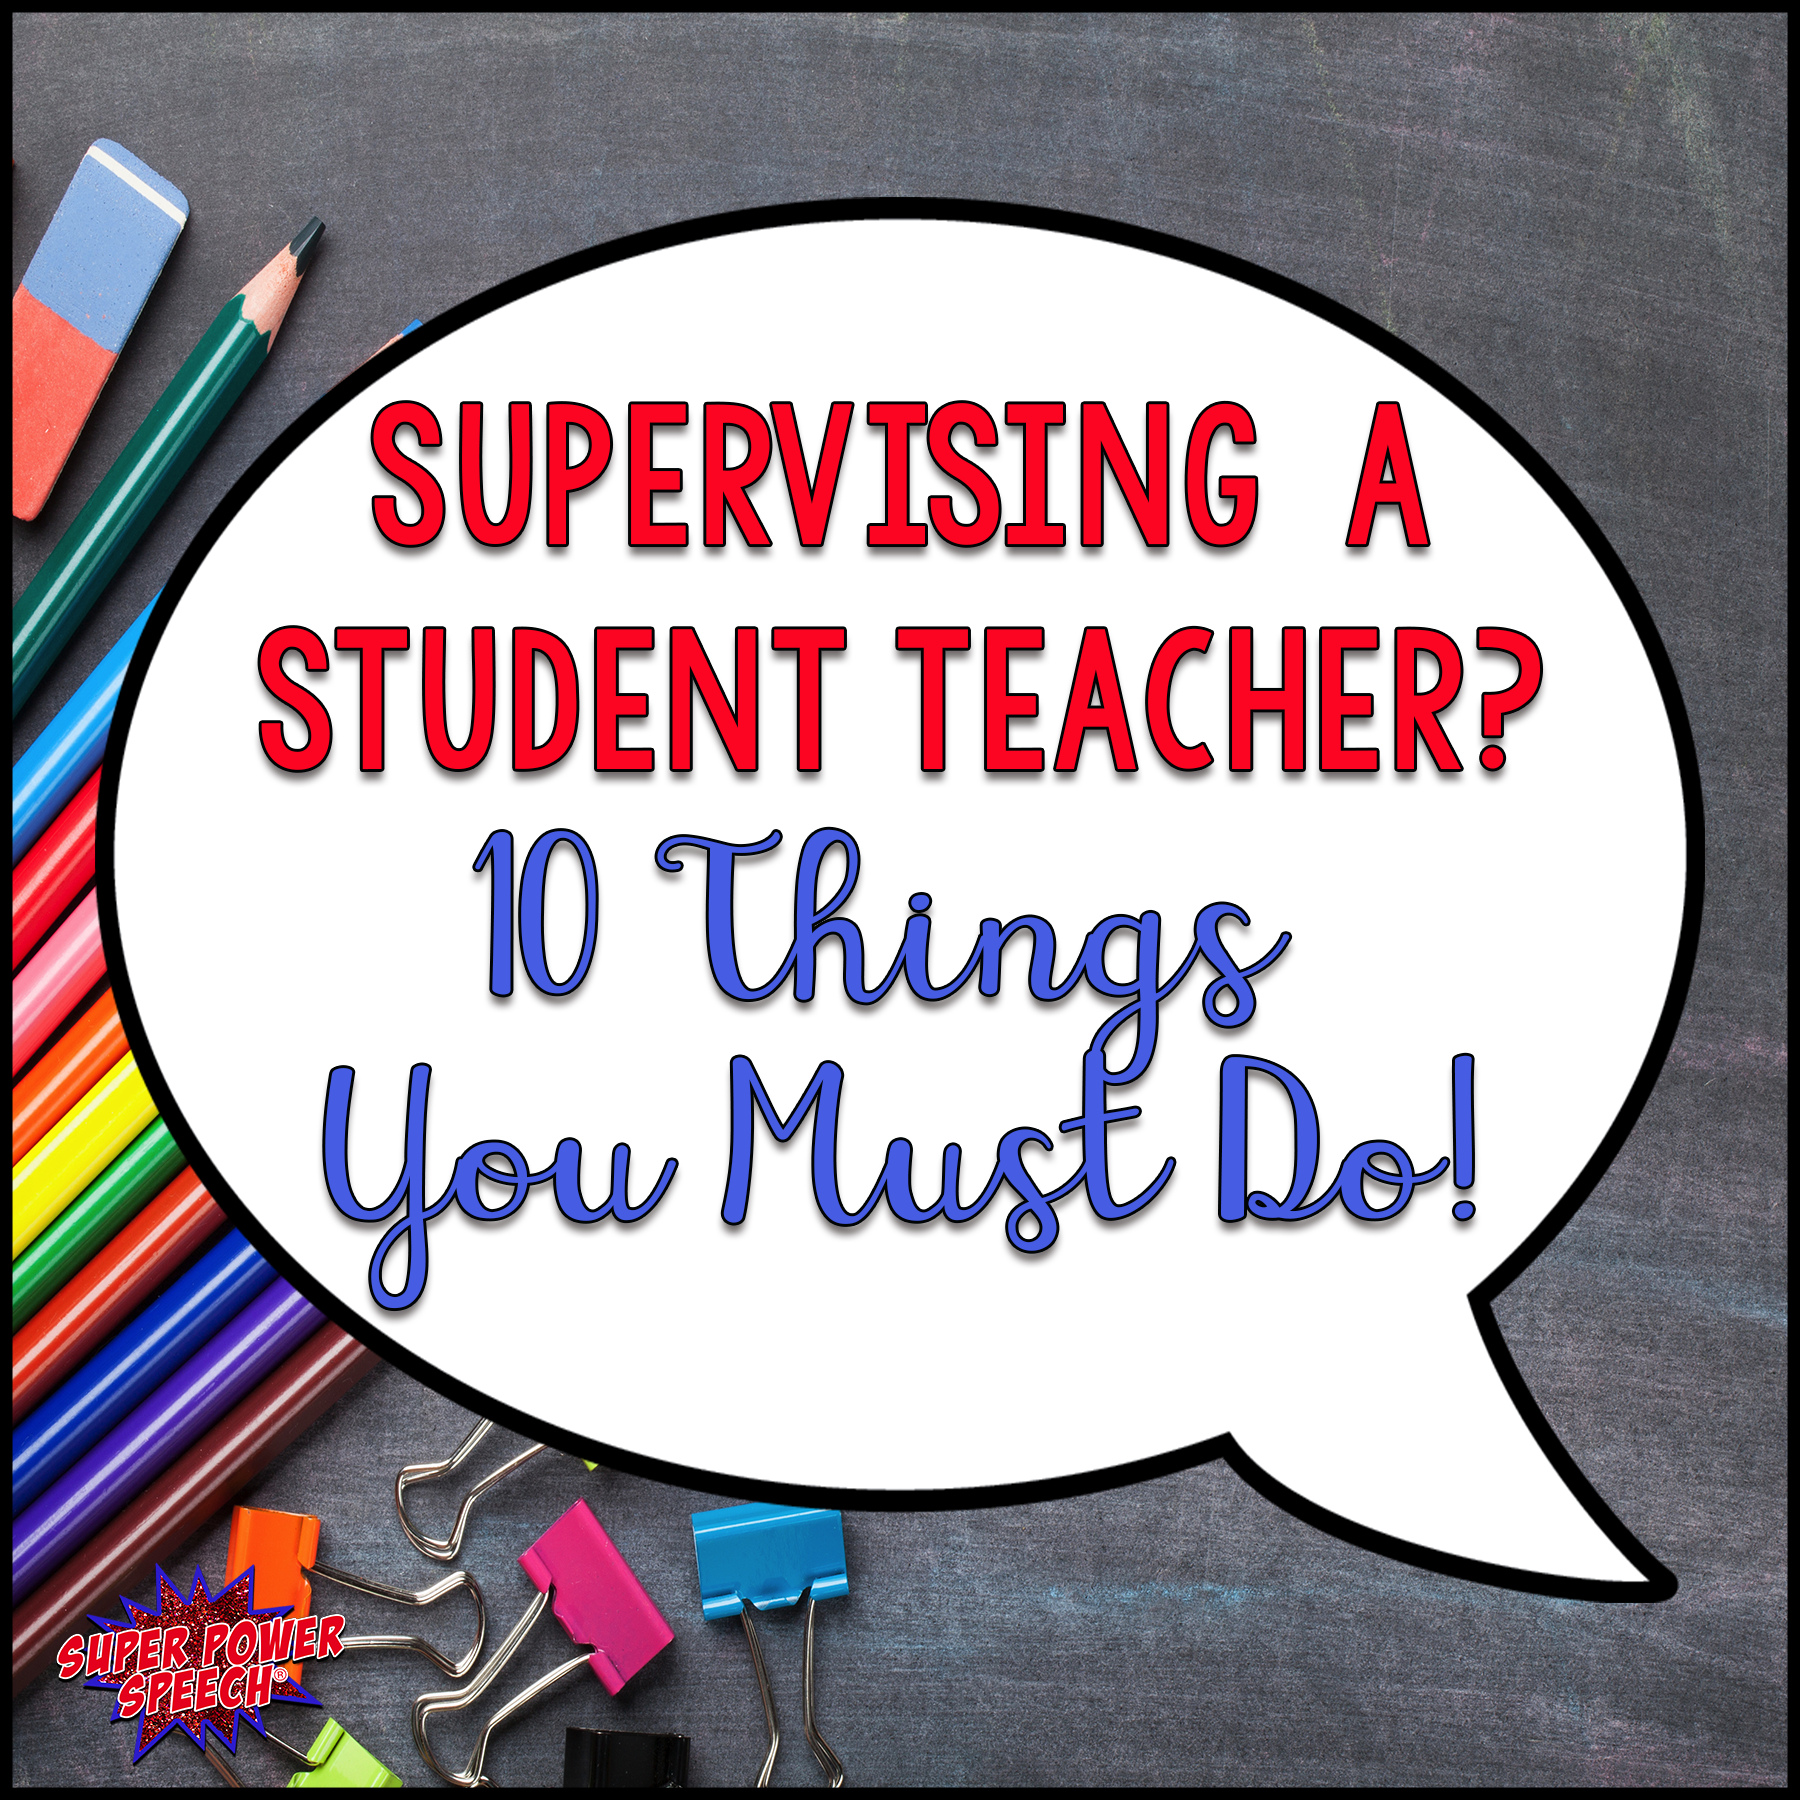 Supervising a Student Teacher? 10 Things You Must Do!